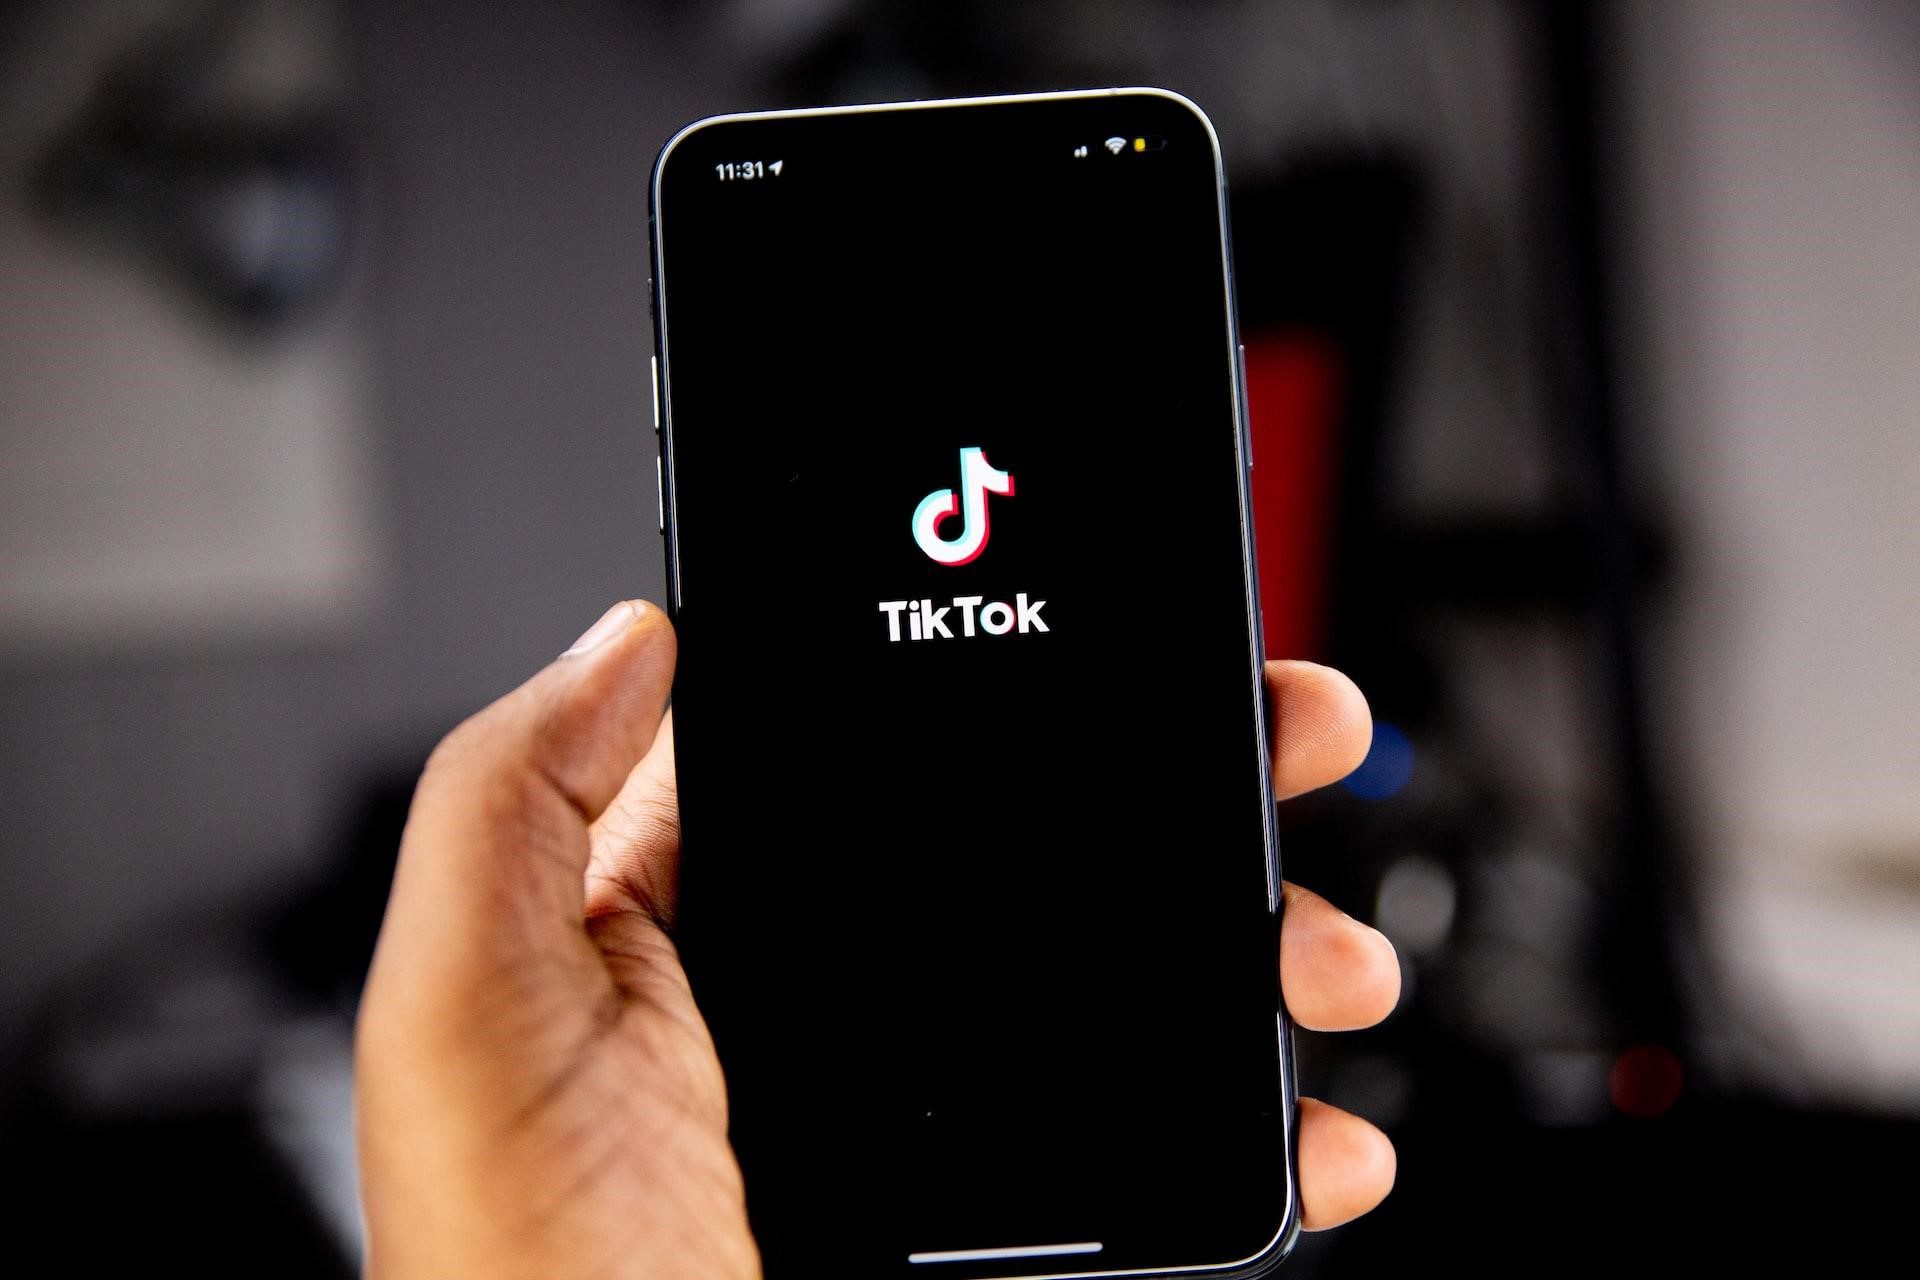 How to Repost a Video on TikTok Easily